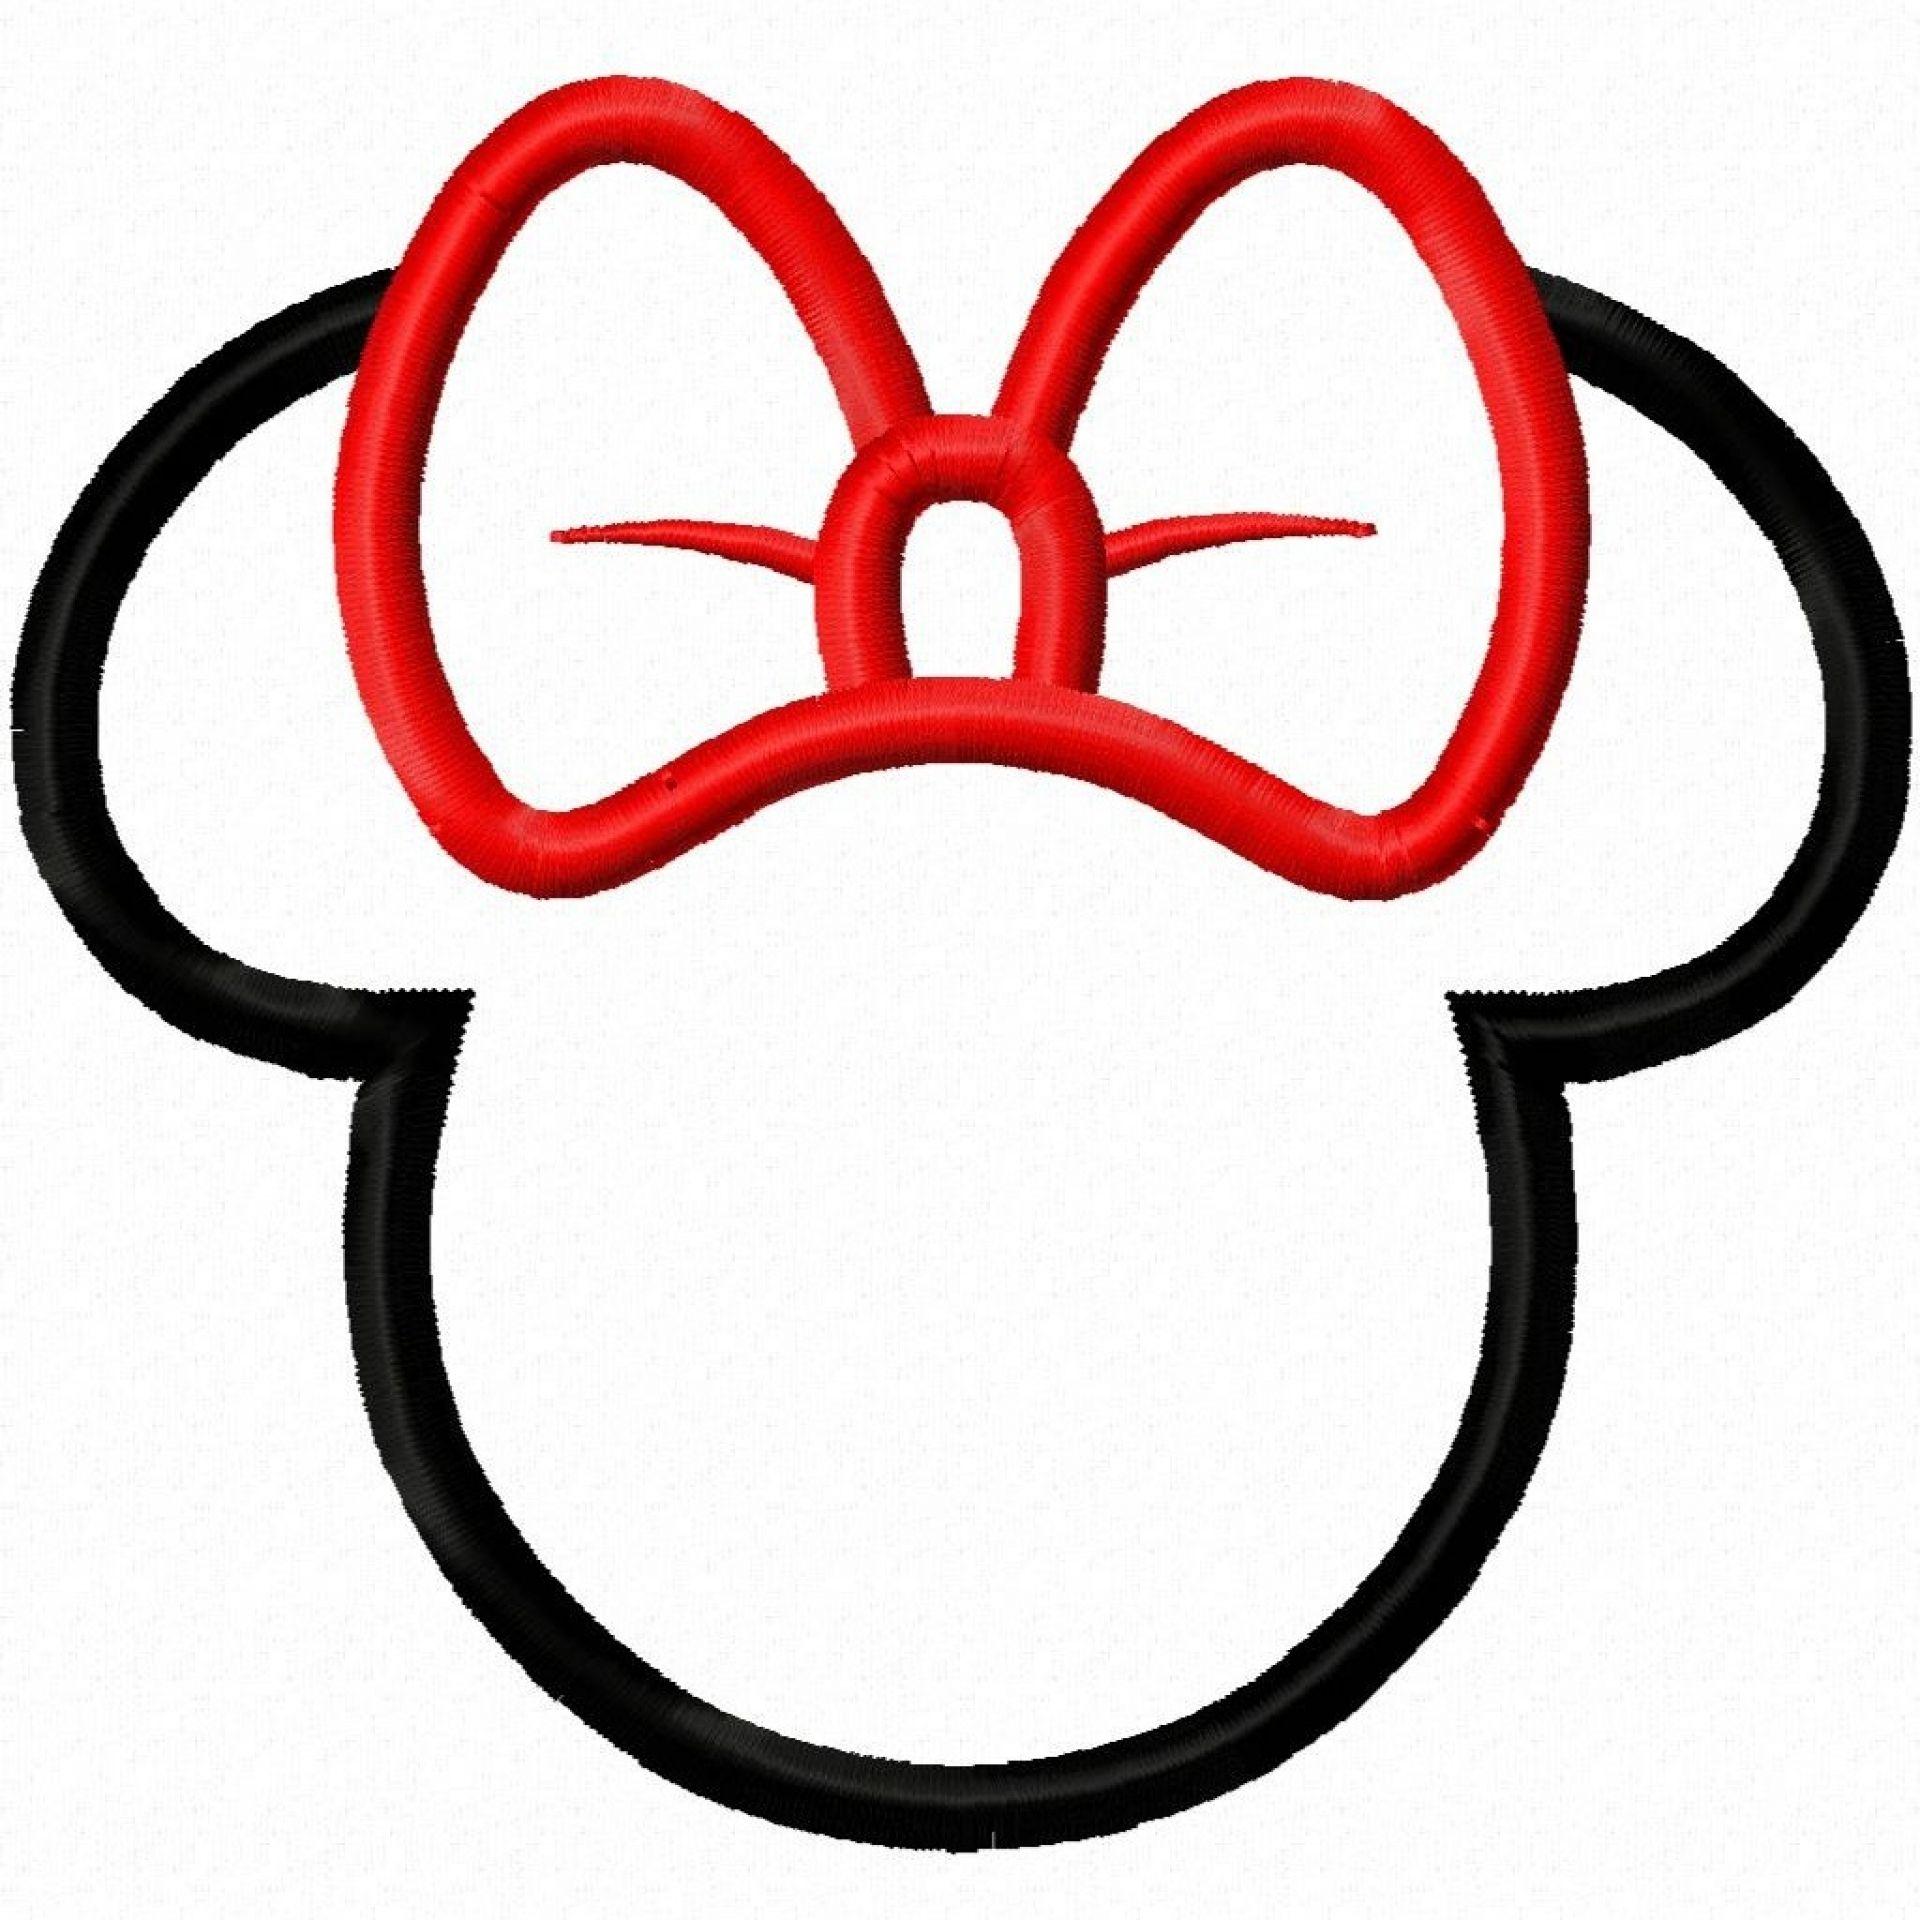 Mickey and Minnie Mouse Logo - Free Mickey Mouse Ears Clipart, Download Free Clip Art, Free Clip ...